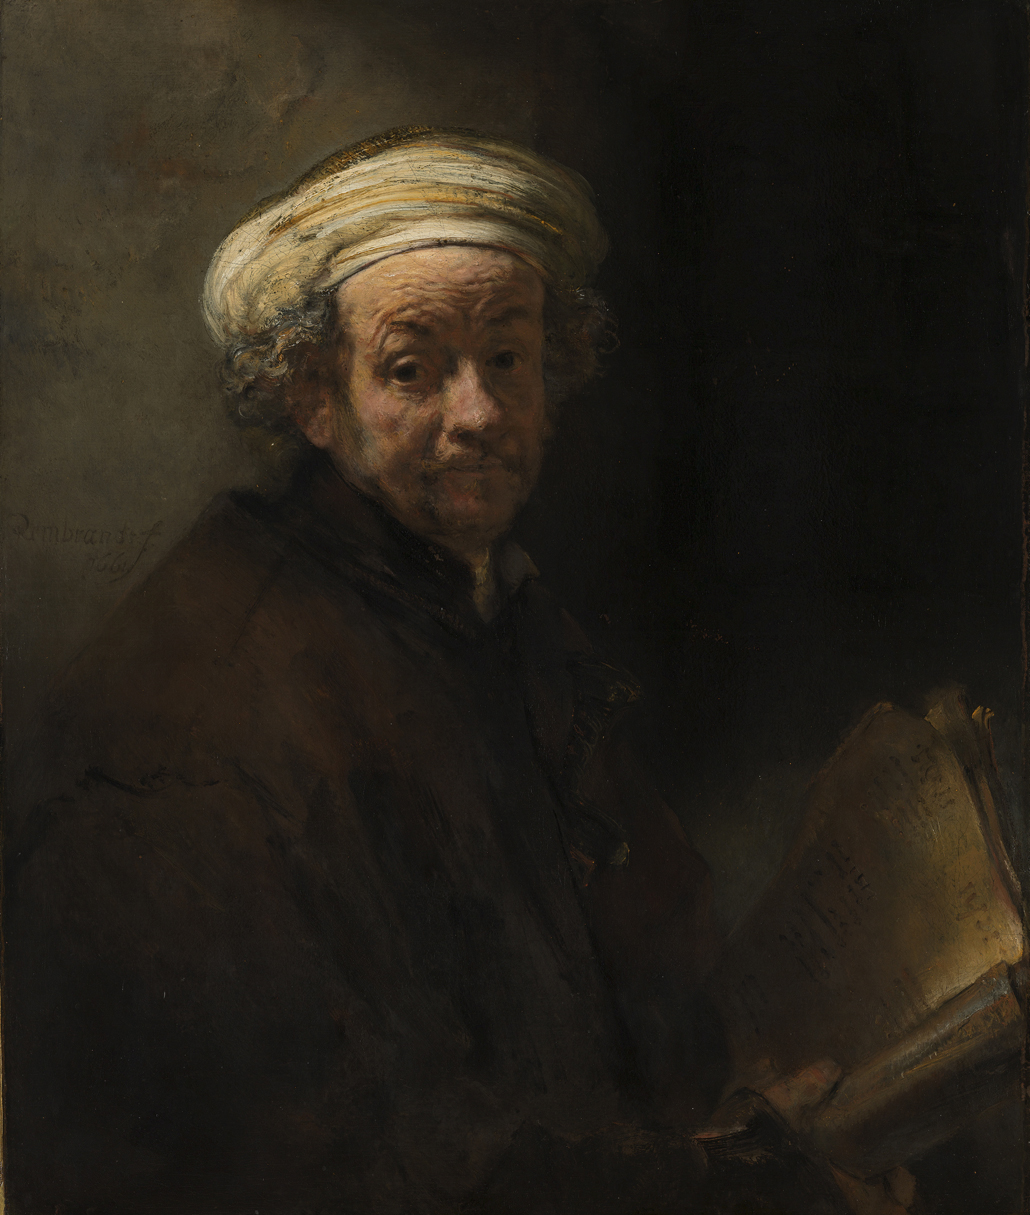 Self-portrait as the Apostle Paul,  one of over 40 painted self-portraits by Rembrandt, painted in 1661, ©courtesy Rijksmuseum, Amsterdam